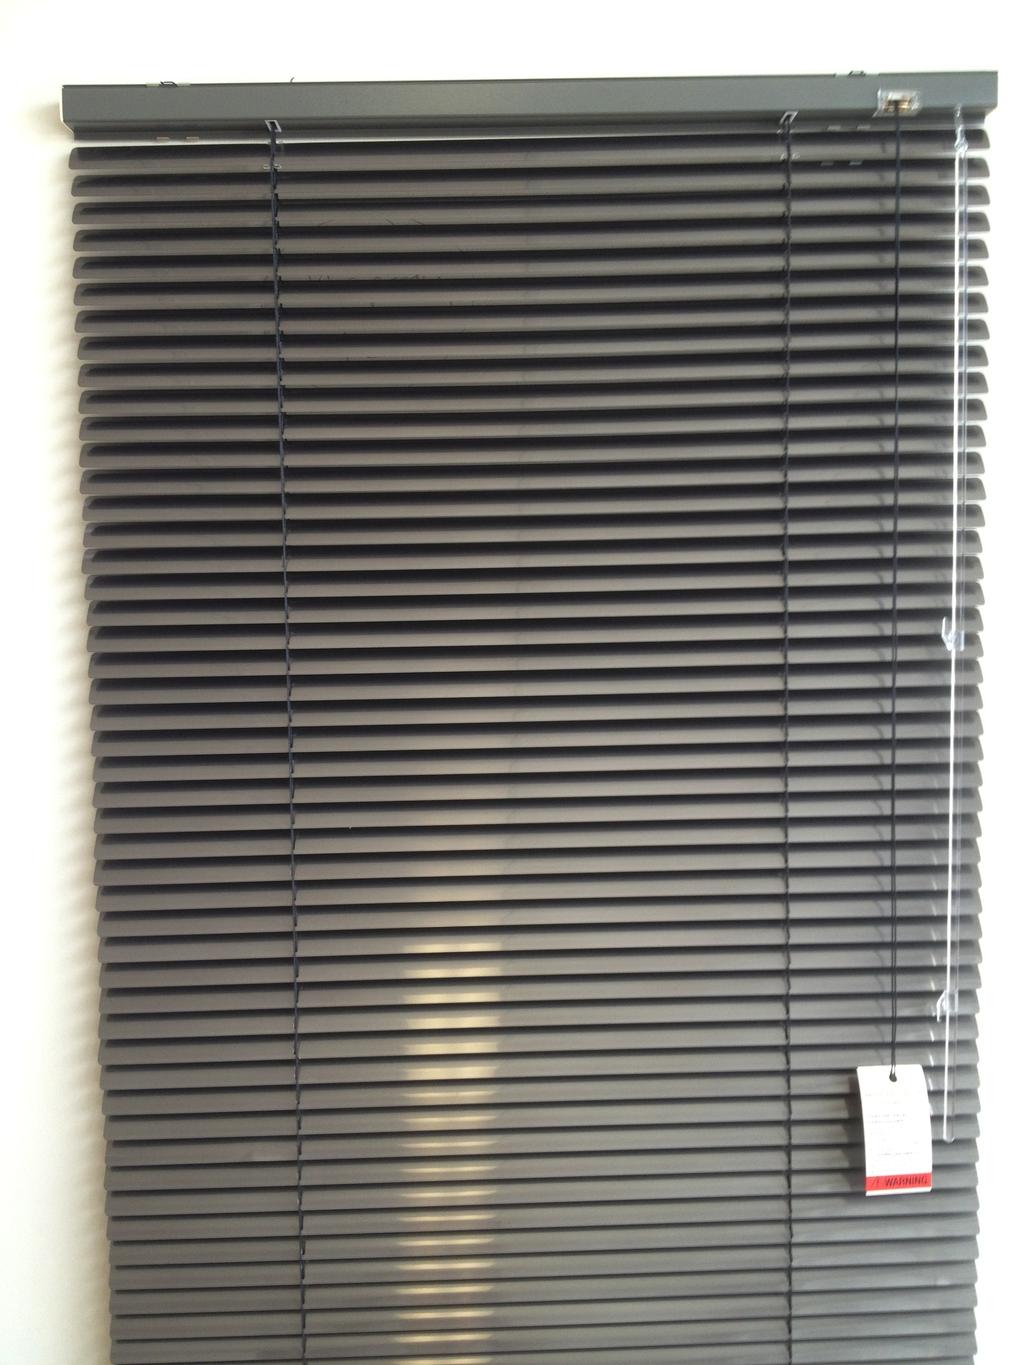 They are made with a quality aluminum in Perth and every part is made to a Good quality. The blinds are controlled by a wand and cord, which are child safe.